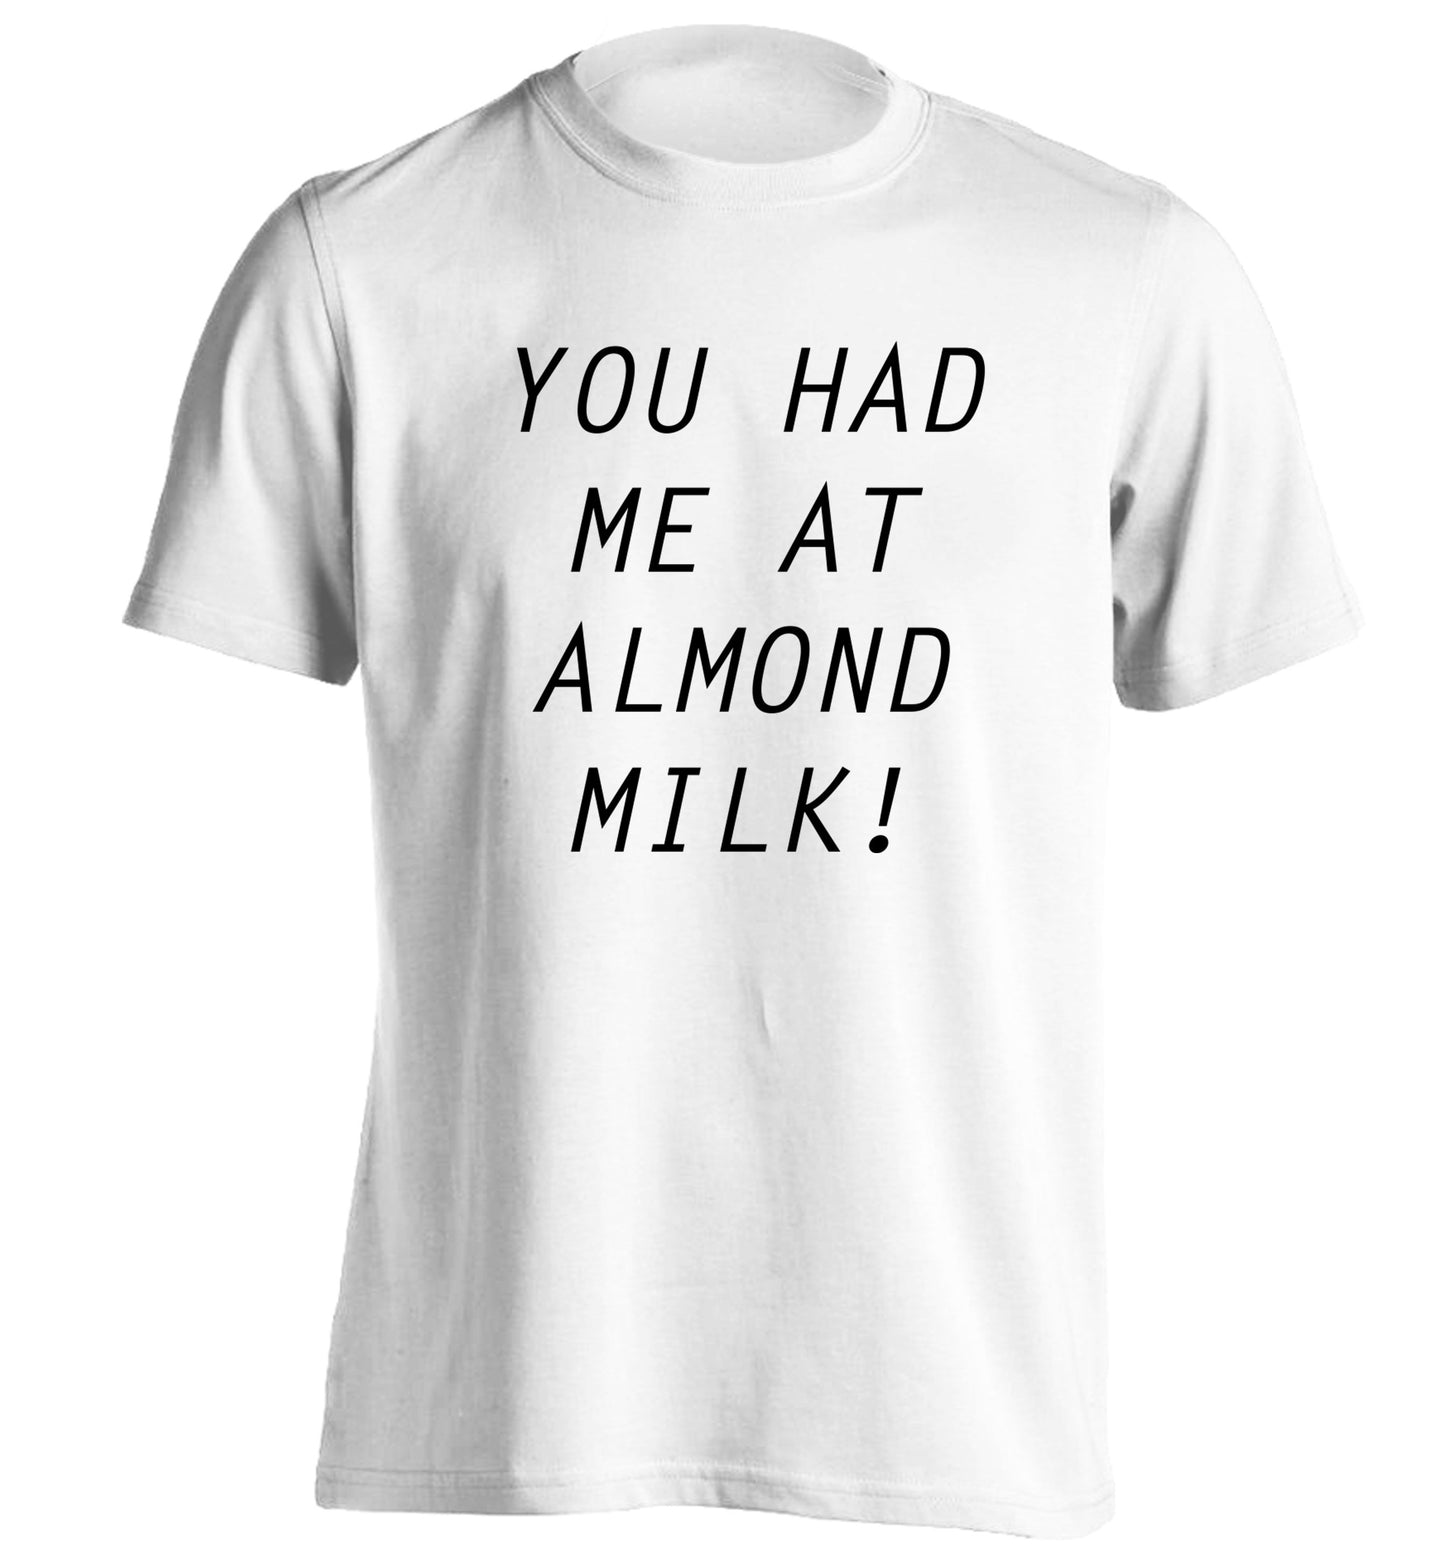 You had me at almond milk adults unisex white Tshirt 2XL